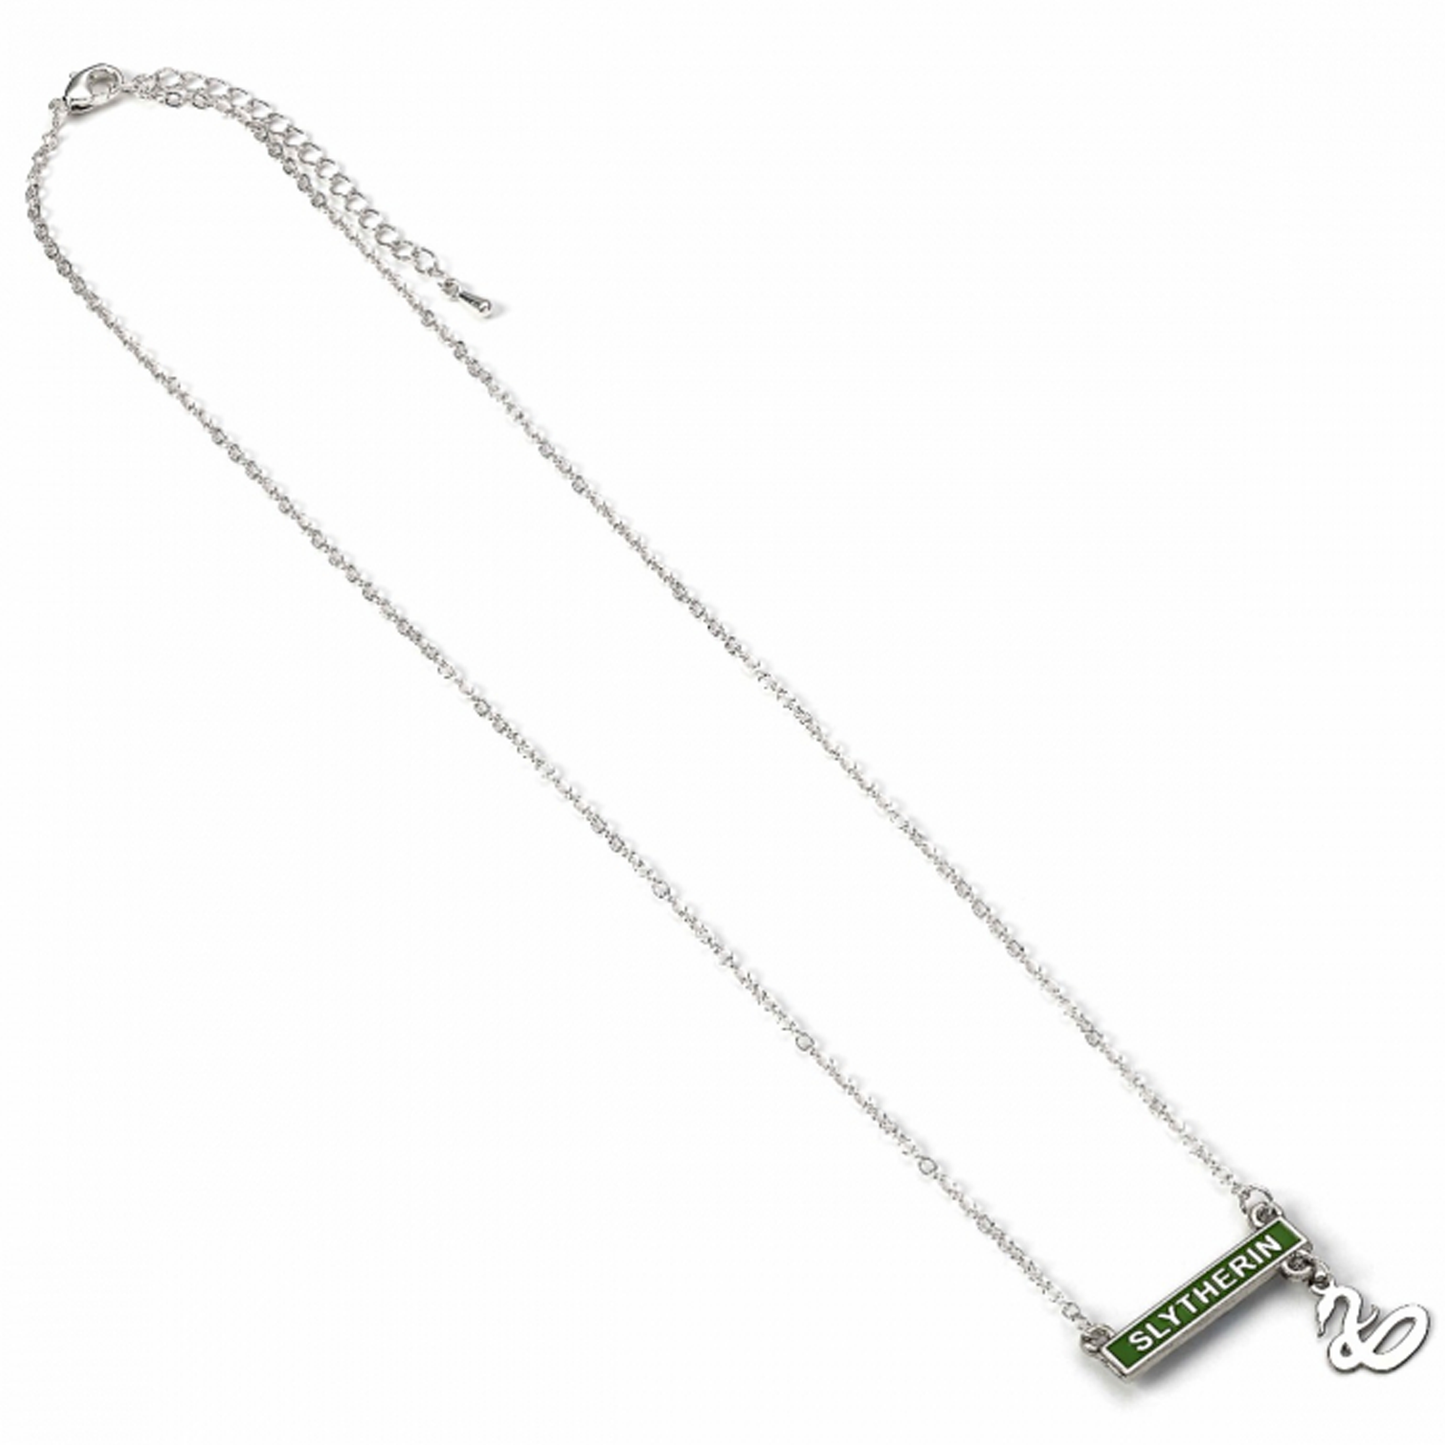 Slytherin - Harry Potter Hogwarts House Bar Necklace (Pendant and Chain) | Happy Piranha